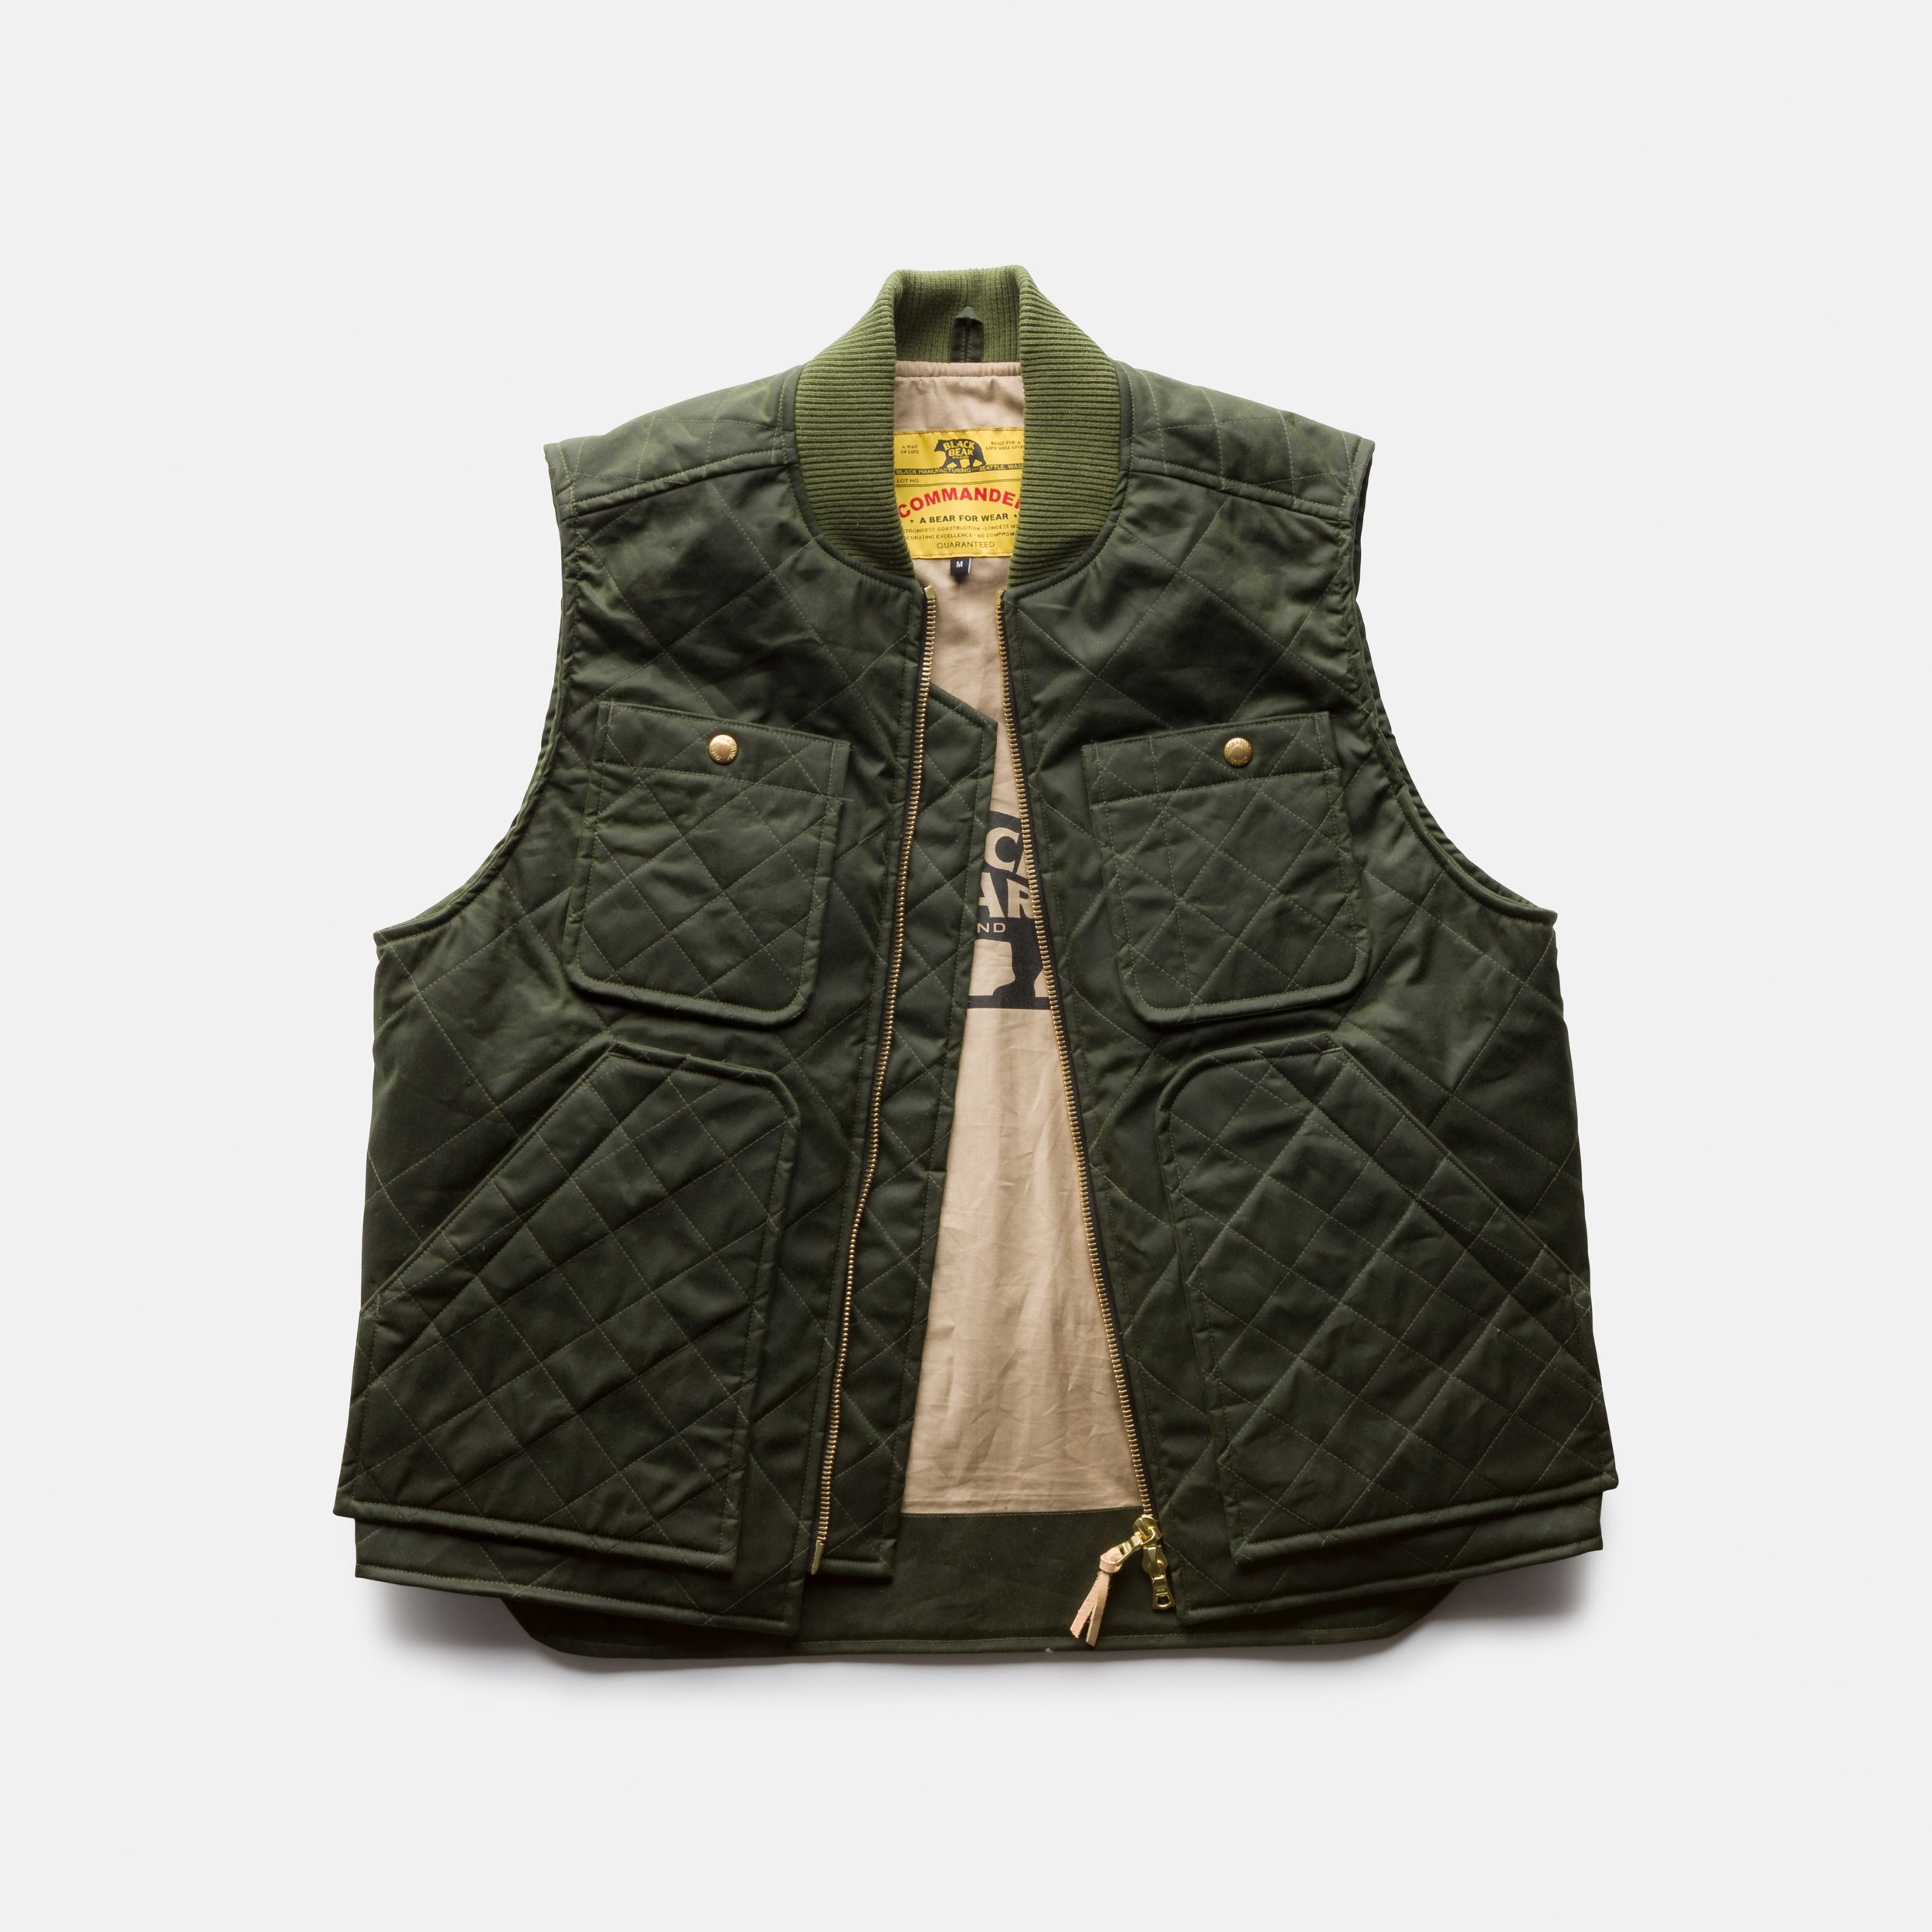 The Ultimate Wax Canvas Vest by Black Bear Brand